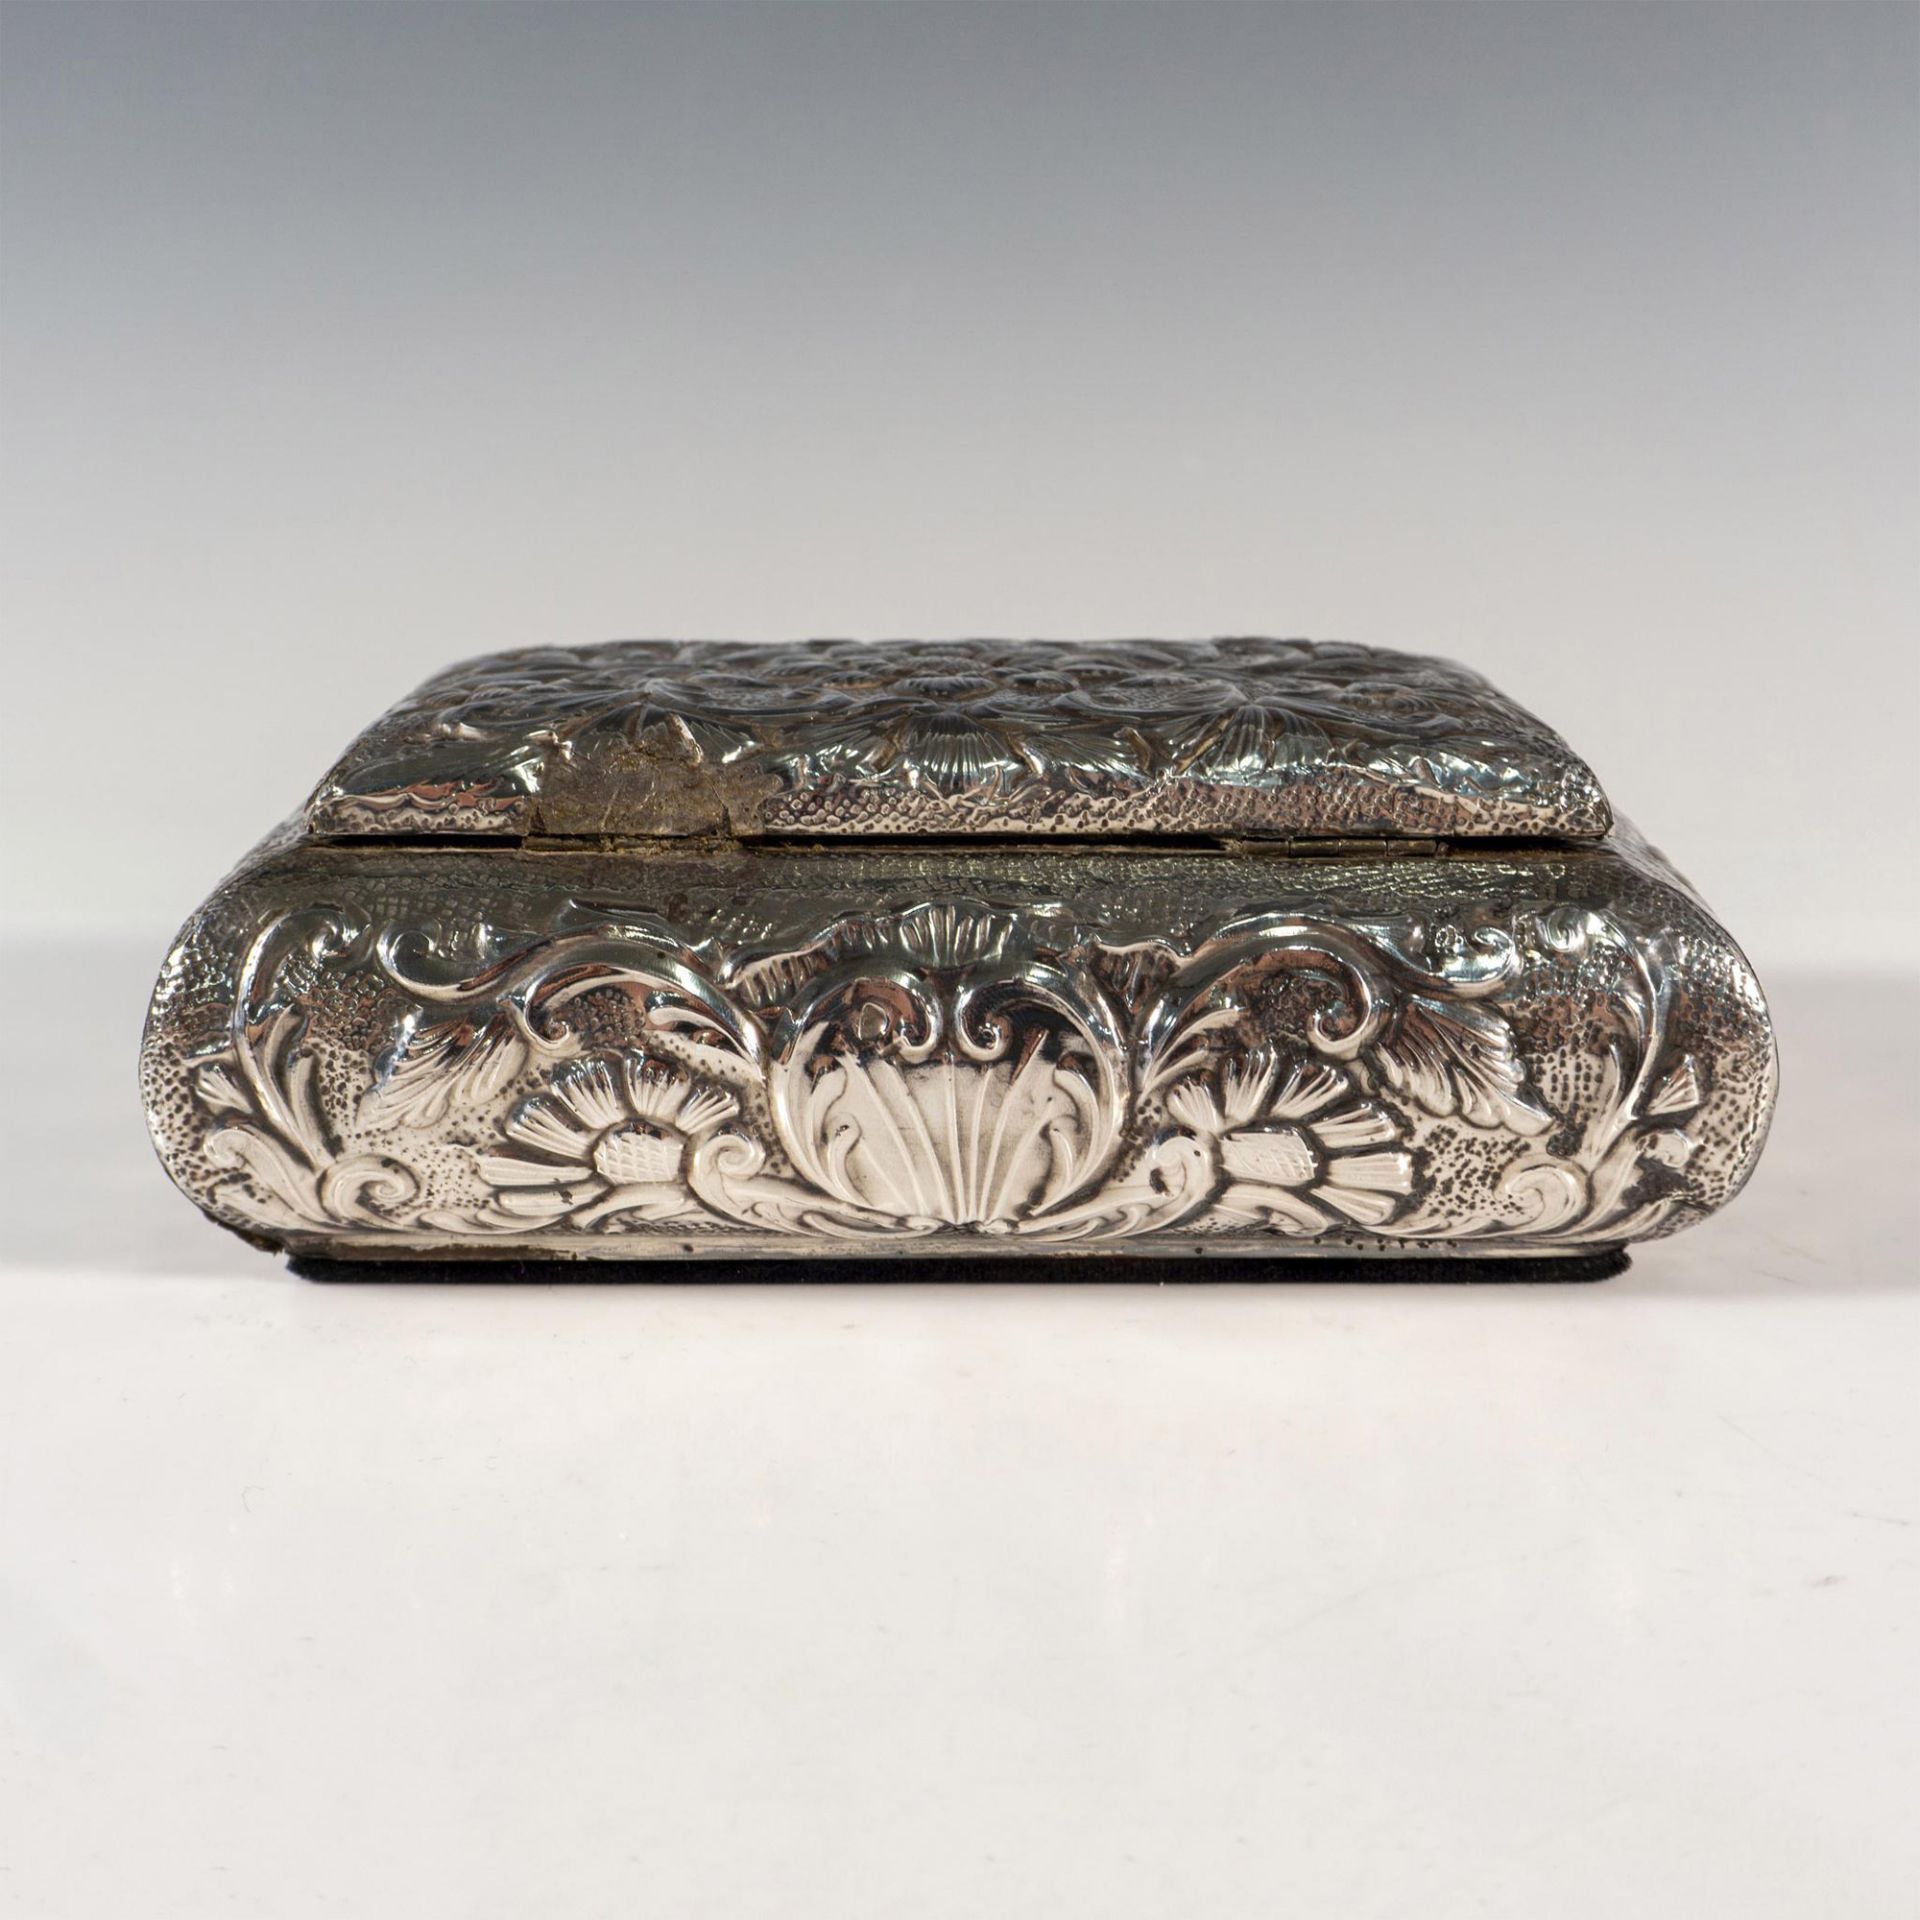 Vintage Sterling Silver Floral Jewelry Box - Image 3 of 4